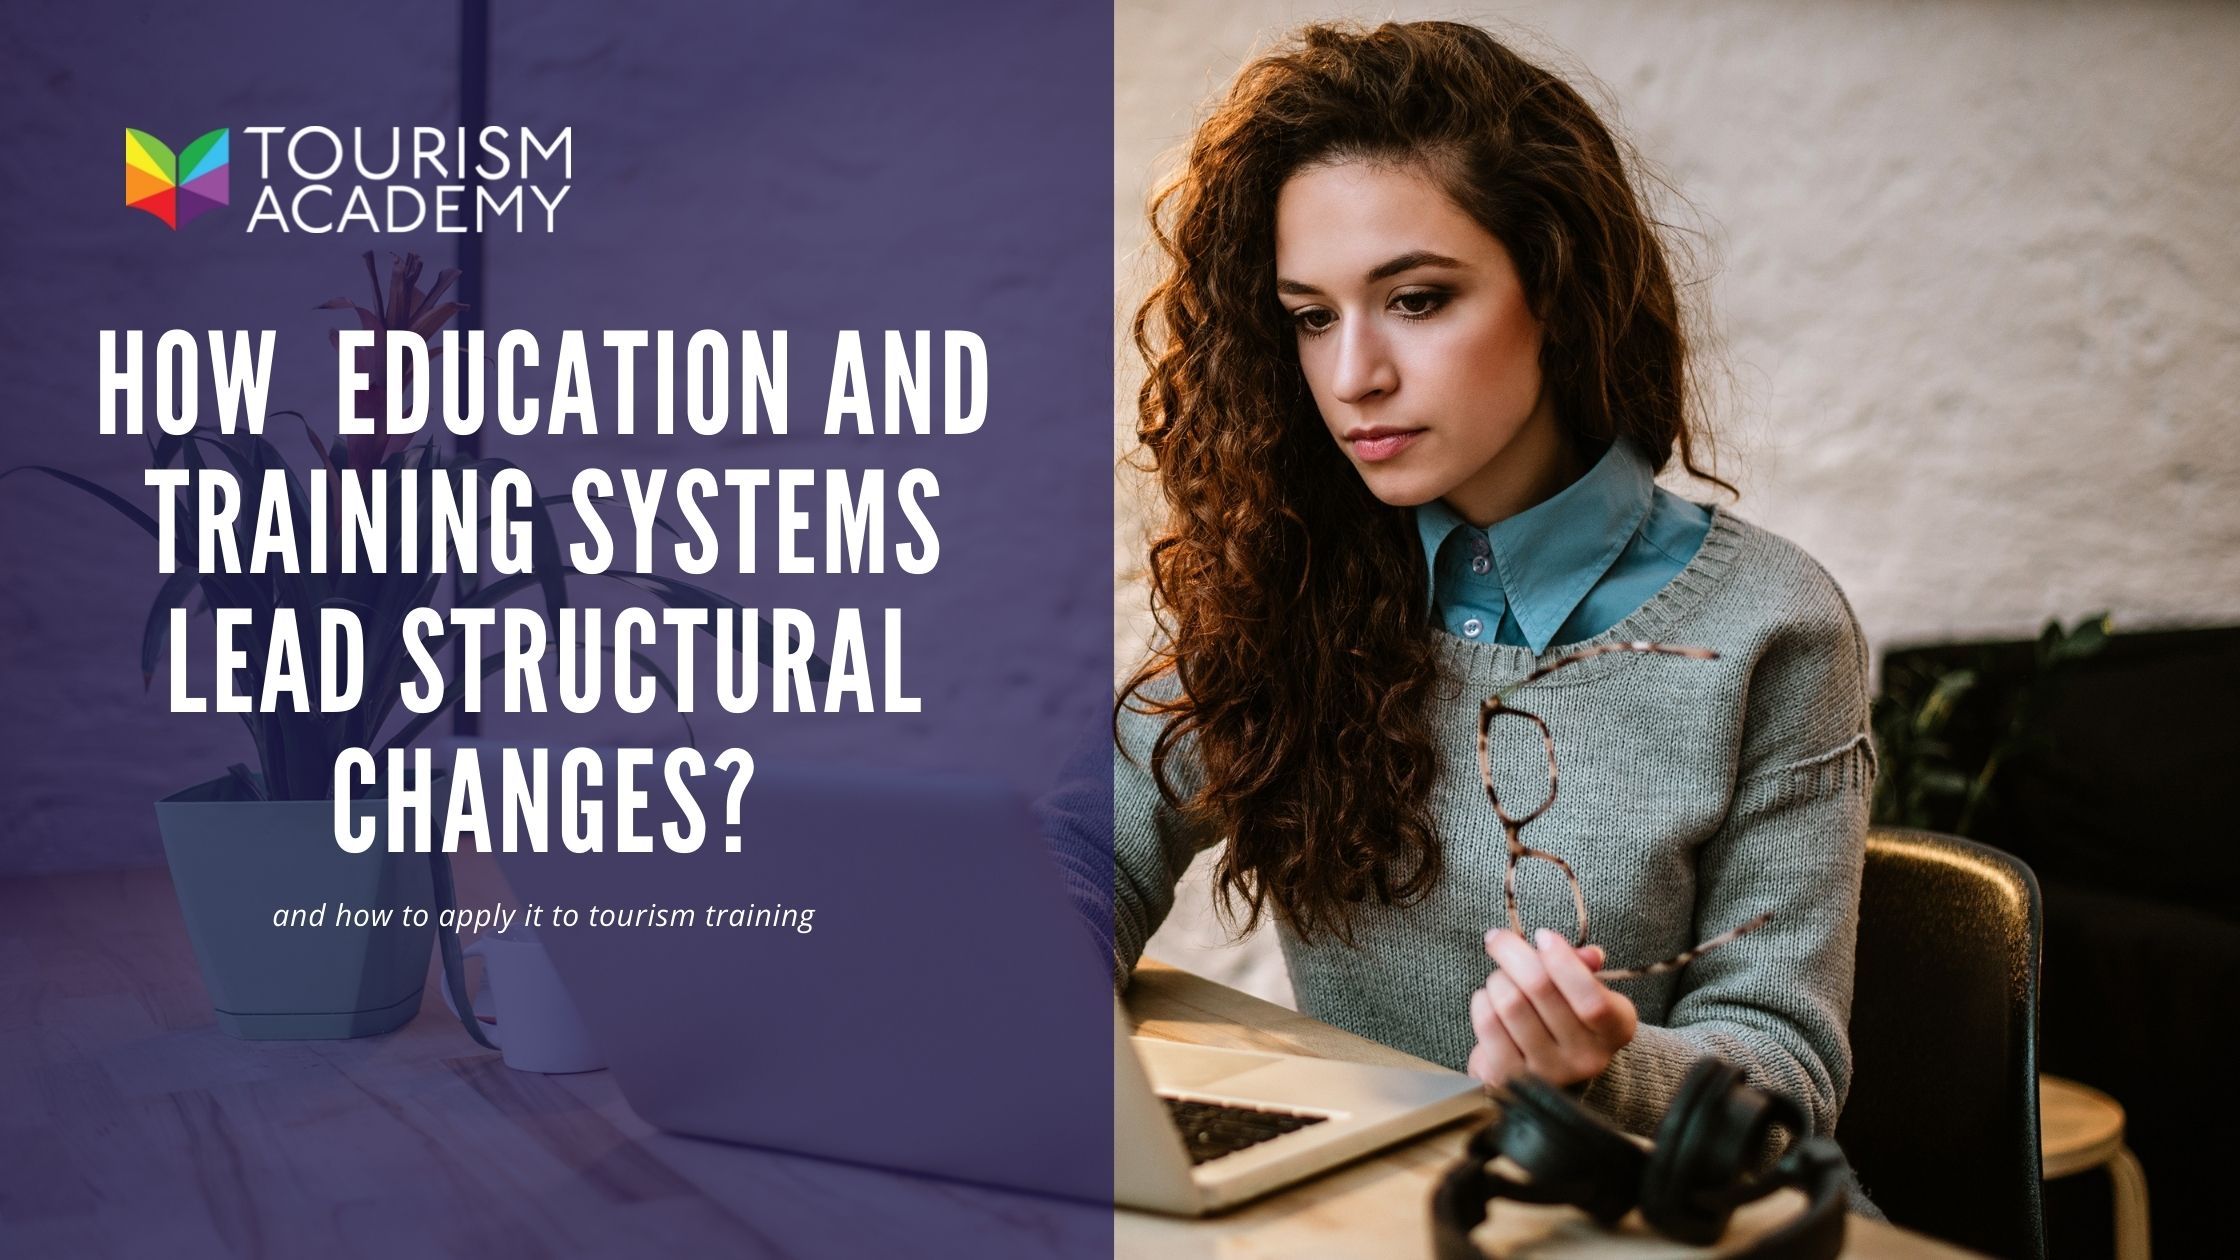 HOW CAN EDUCATION AND TRAINING SYSTEMS CONTRIBUTE TO STRUCTURAL CHANGES IN THE TOURISM SECTOR?